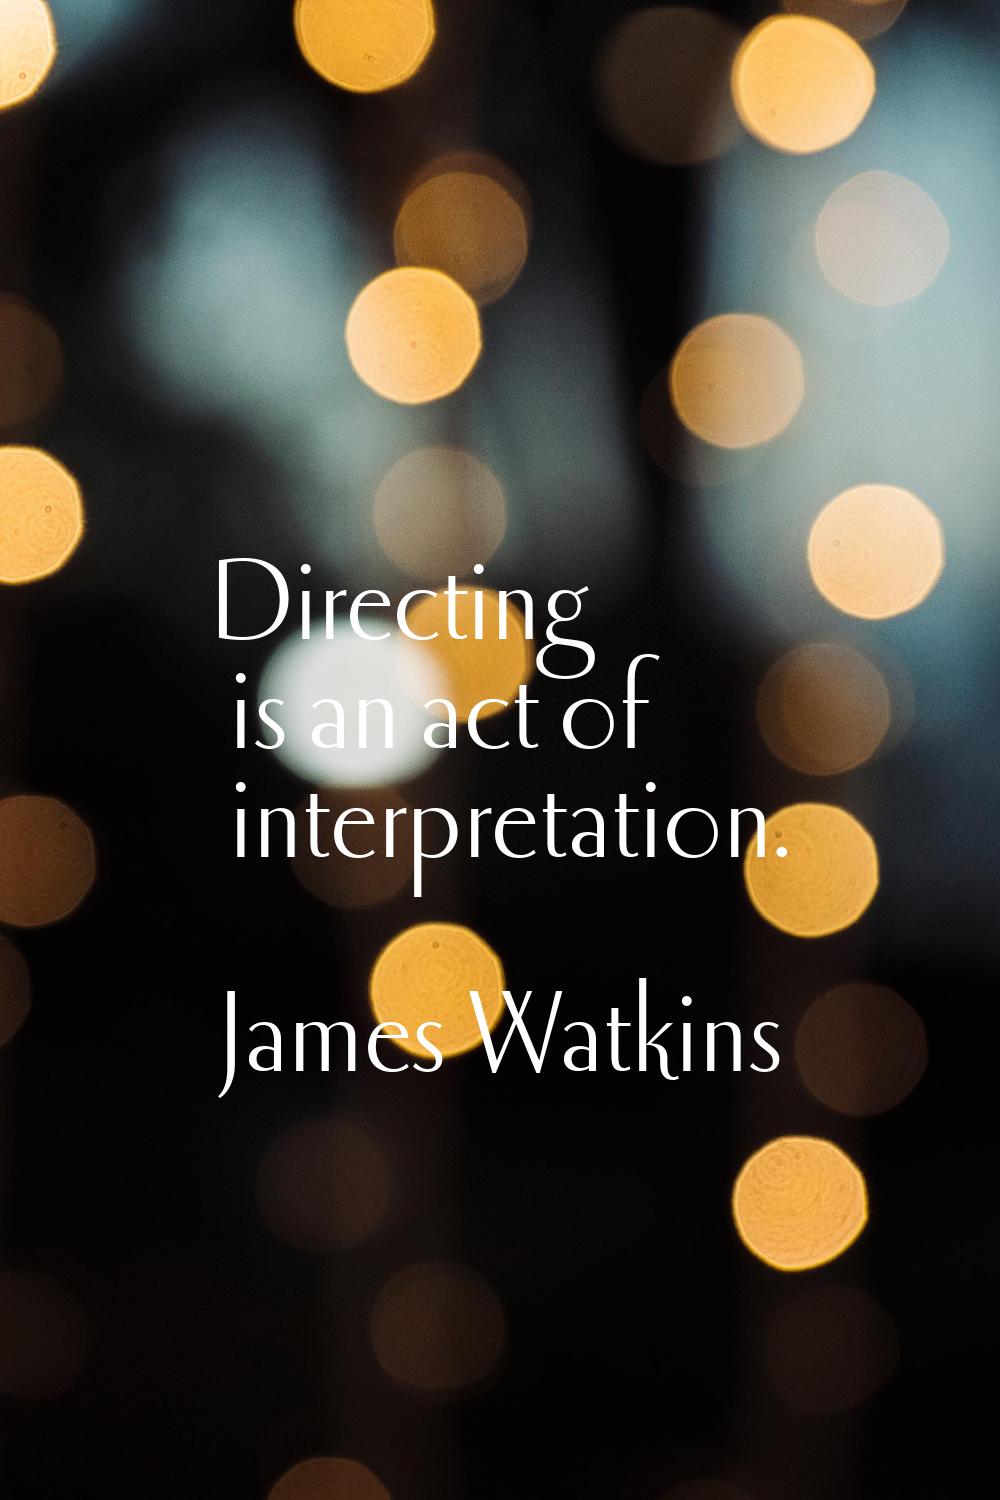 Directing is an act of interpretation.